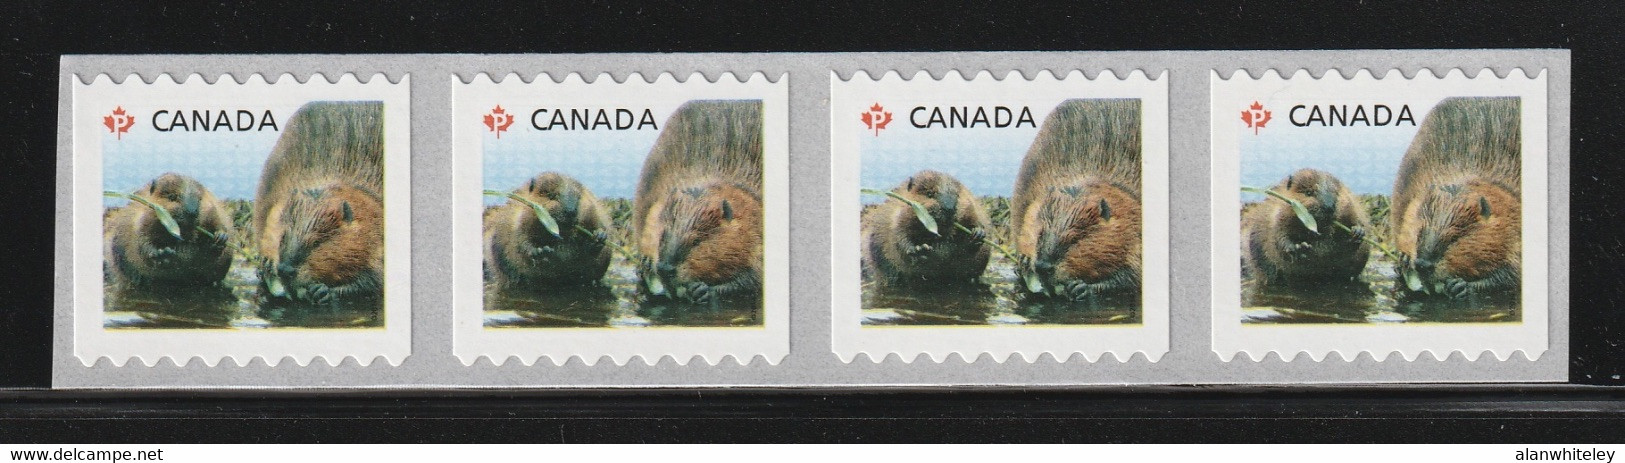 CANADA 2014 Definitives / Young Wildlife / Beaver S/ADH: Strip Of 4 Stamps (Sideways) UM/MNH - Rollen